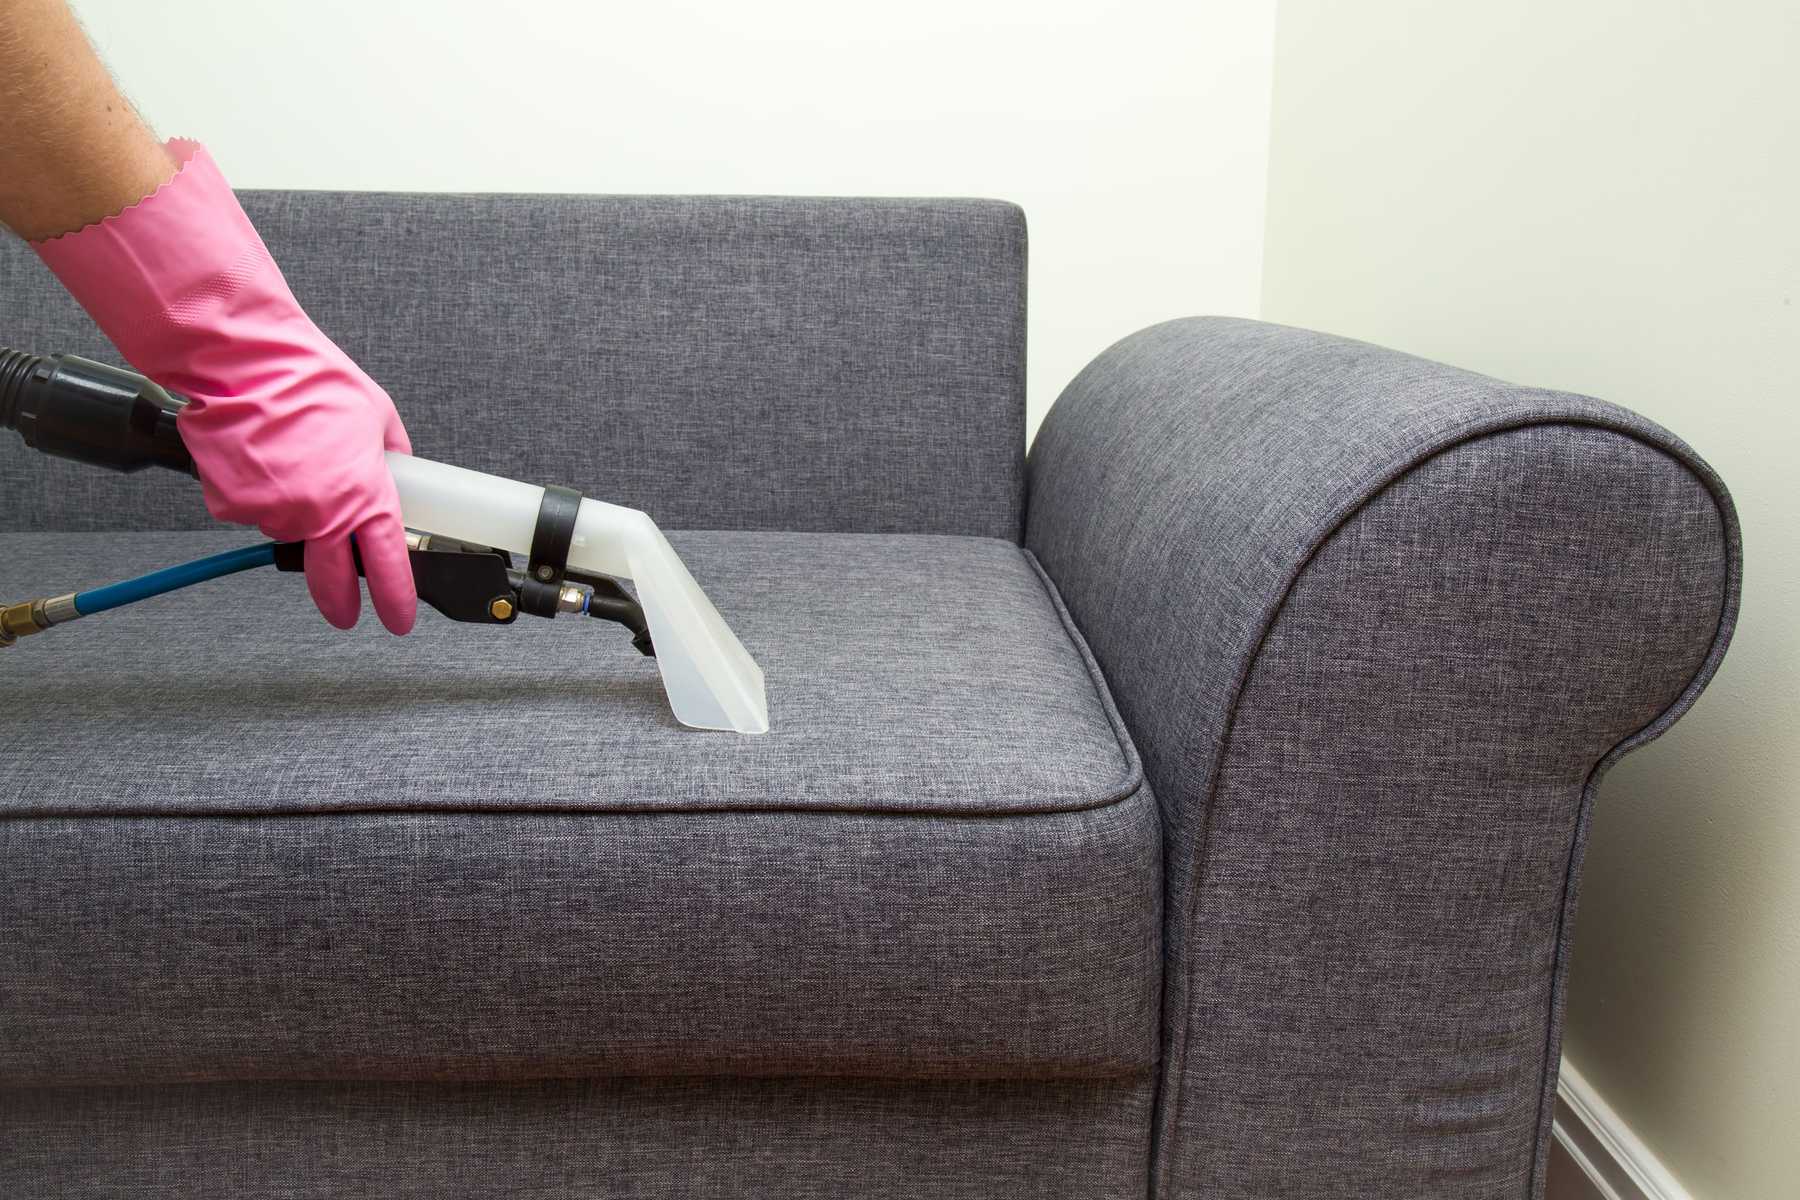 couch cleaning